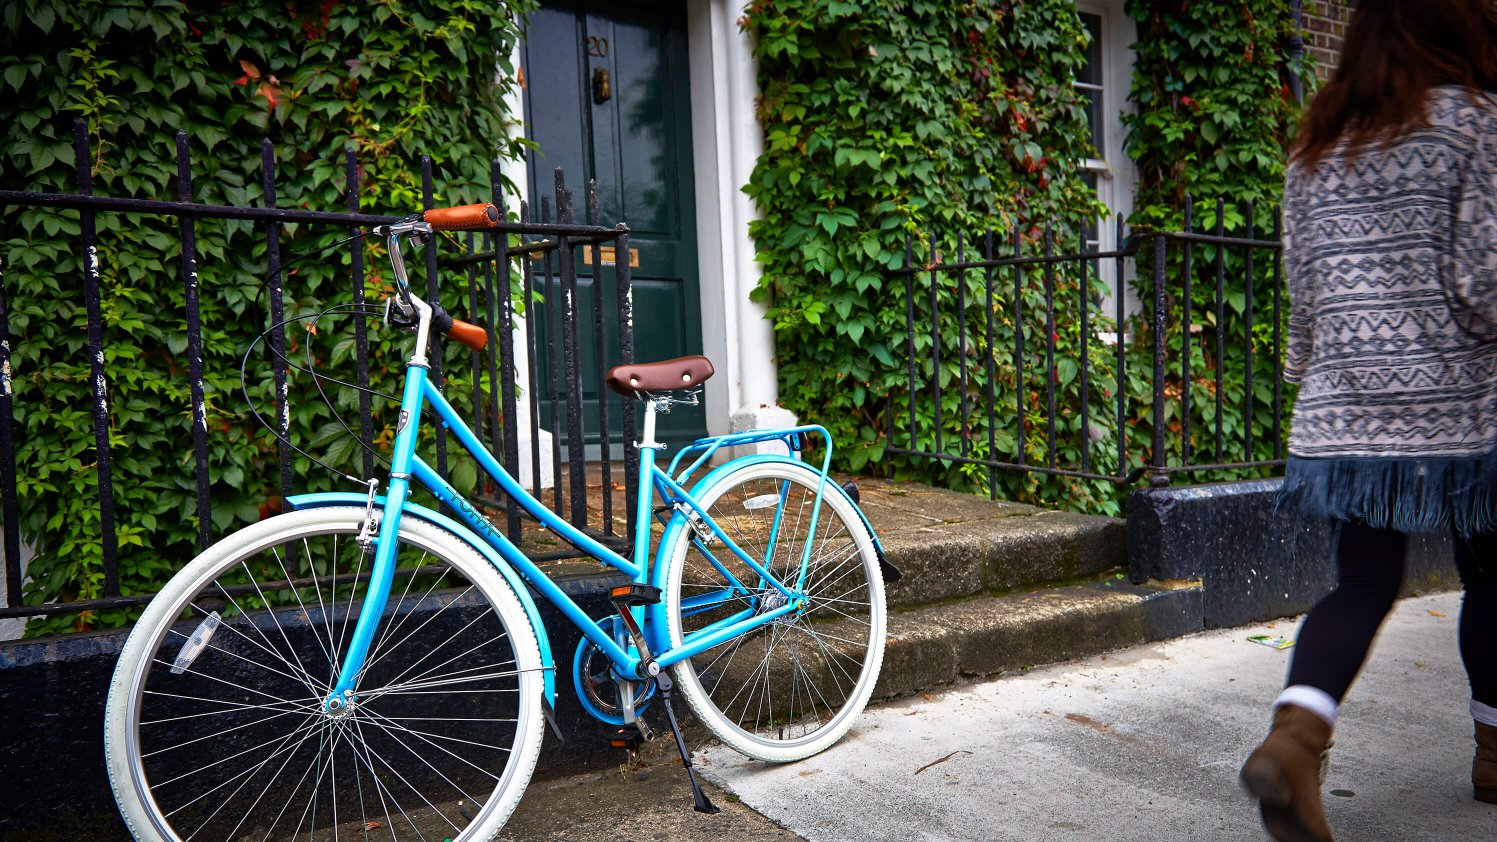 A vibrantly blue bike leans against the railing of an ivy-coloured Georgian front door as a female walks by